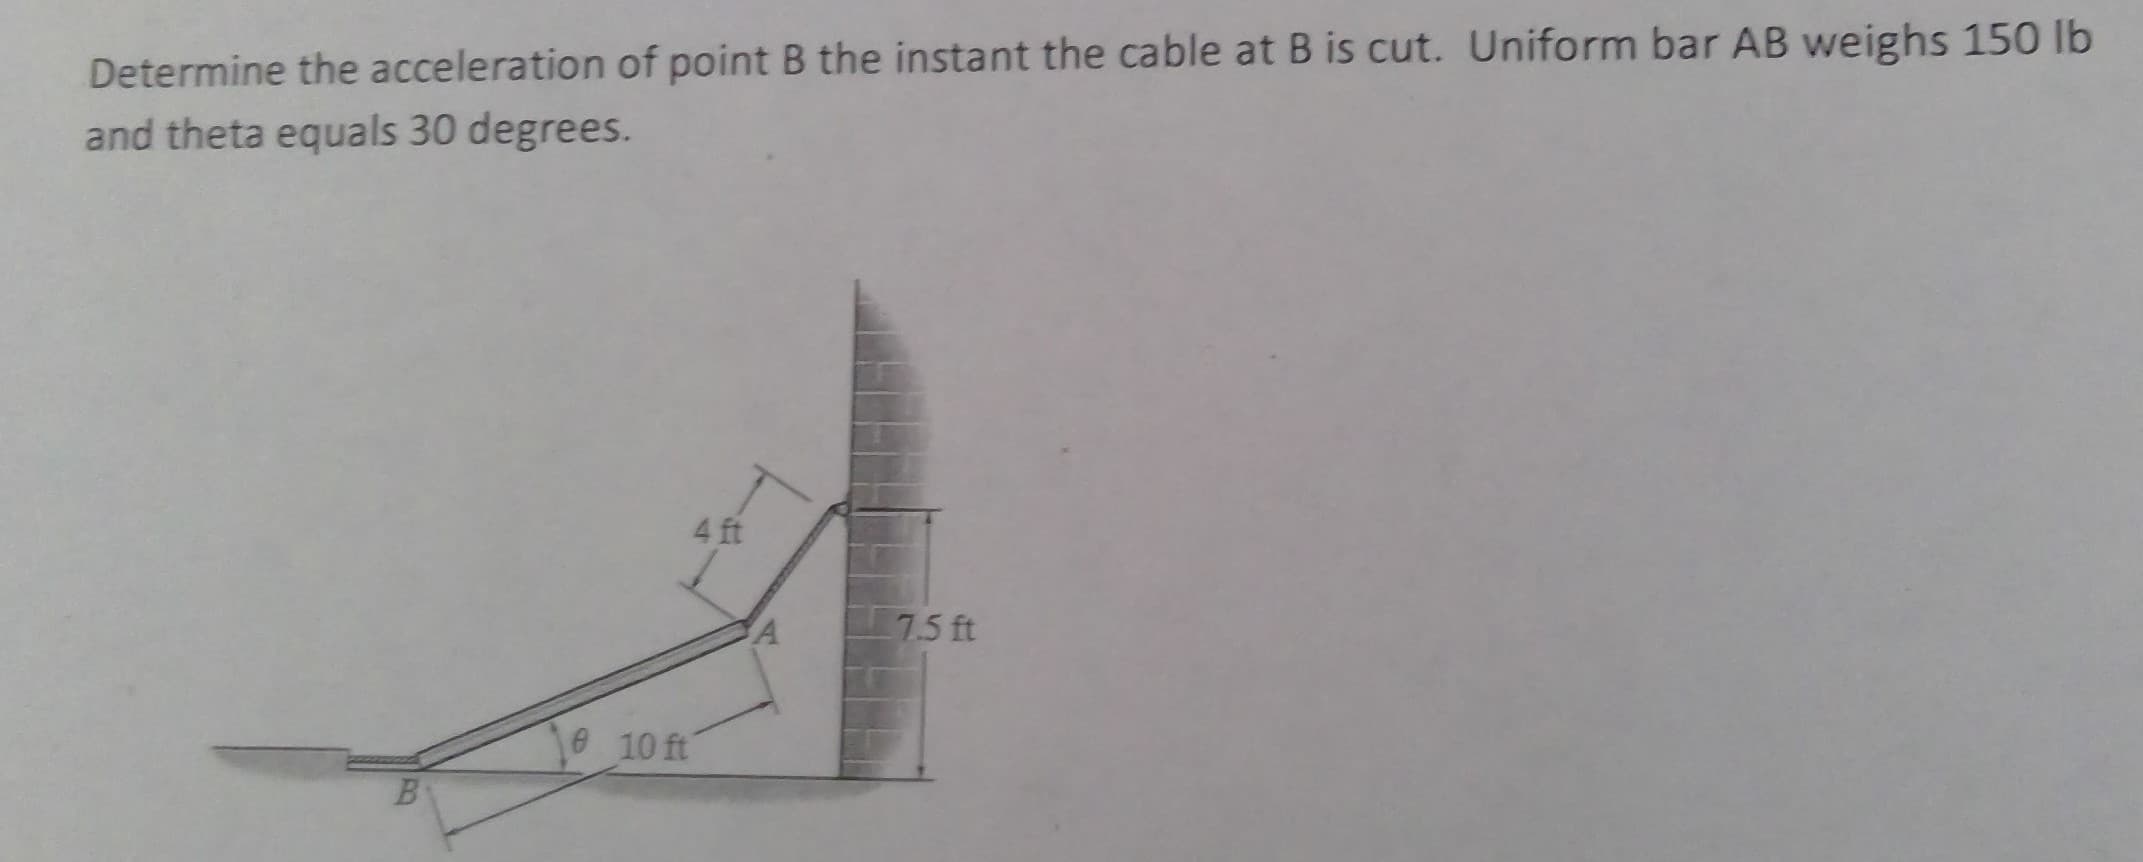 Determine the acceleration of point B the instant the cable at B is cut. Uniform bar AB weighs 150 lb
and theta equals 30 degrees.
4 ft
7.5 ft
SA
10 ft
B.
